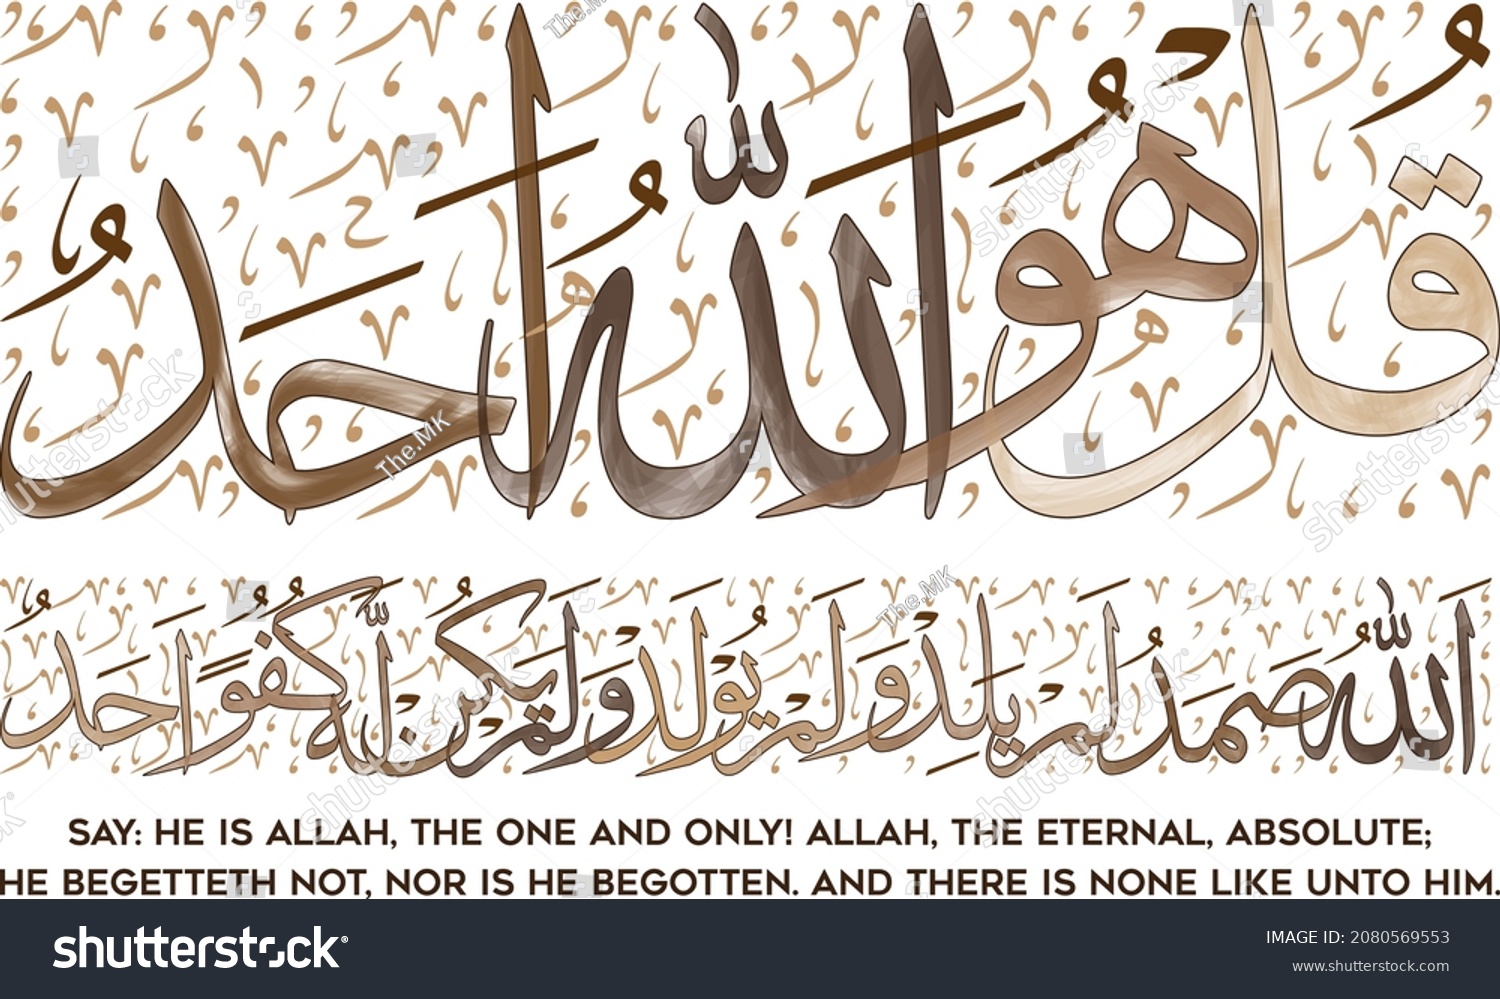 SVG of Arabic Calligraphy of Sorah Al-Ikhlas - Meaning in English:
Say: He is Allah, the One and Only! Allah, the Eternal, Absolute;
He begetteth not, nor is He begotten. And there is none like unto him. svg